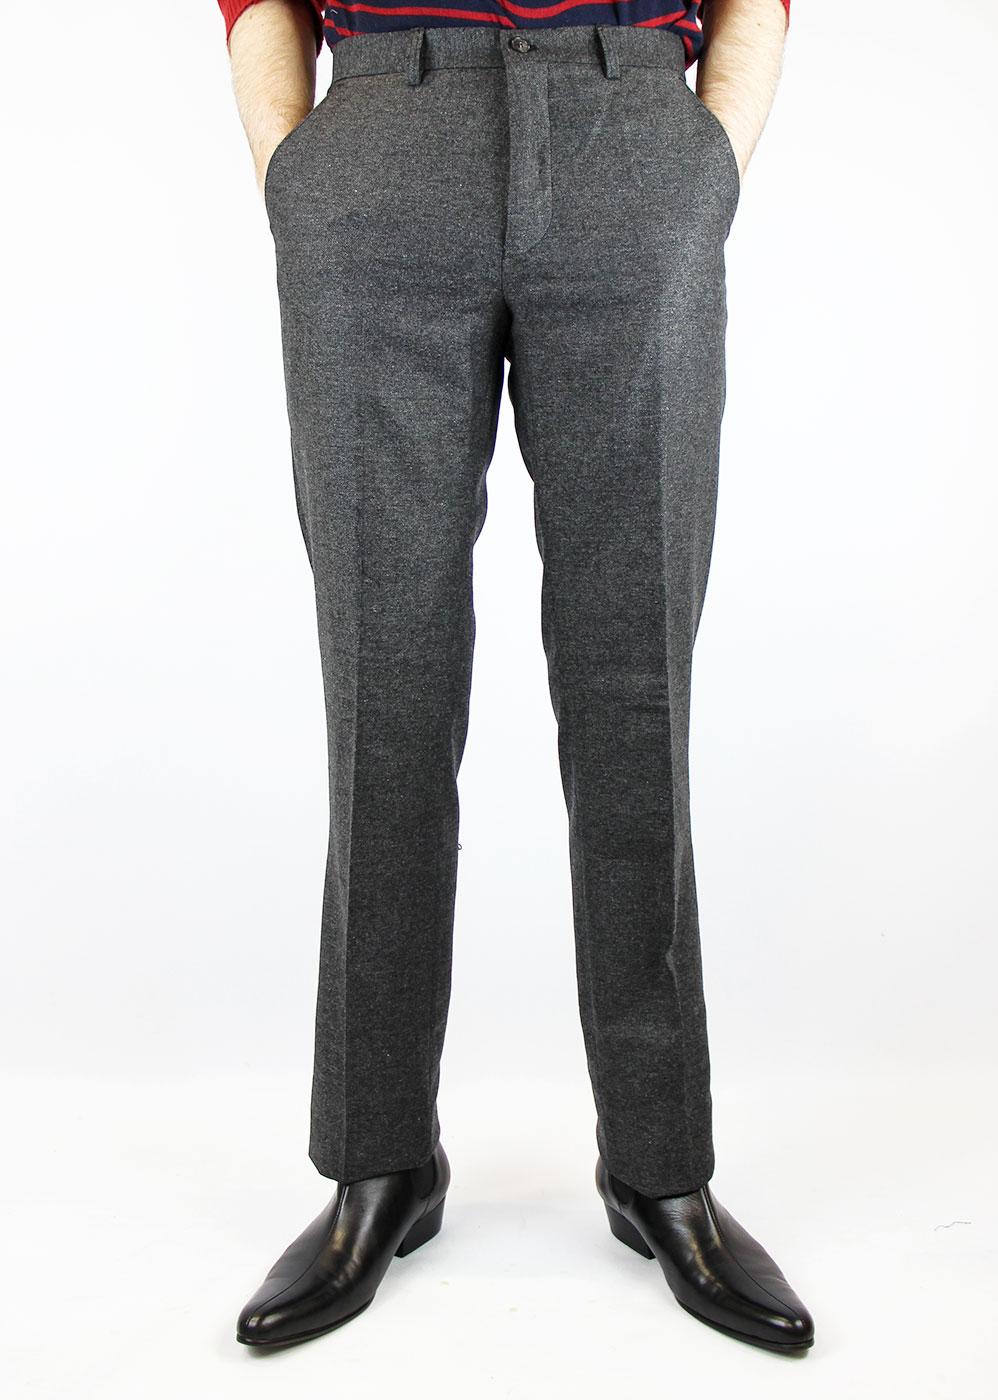 Slim Fit Light Blue Donegal Trousers | Buy Online at Moss